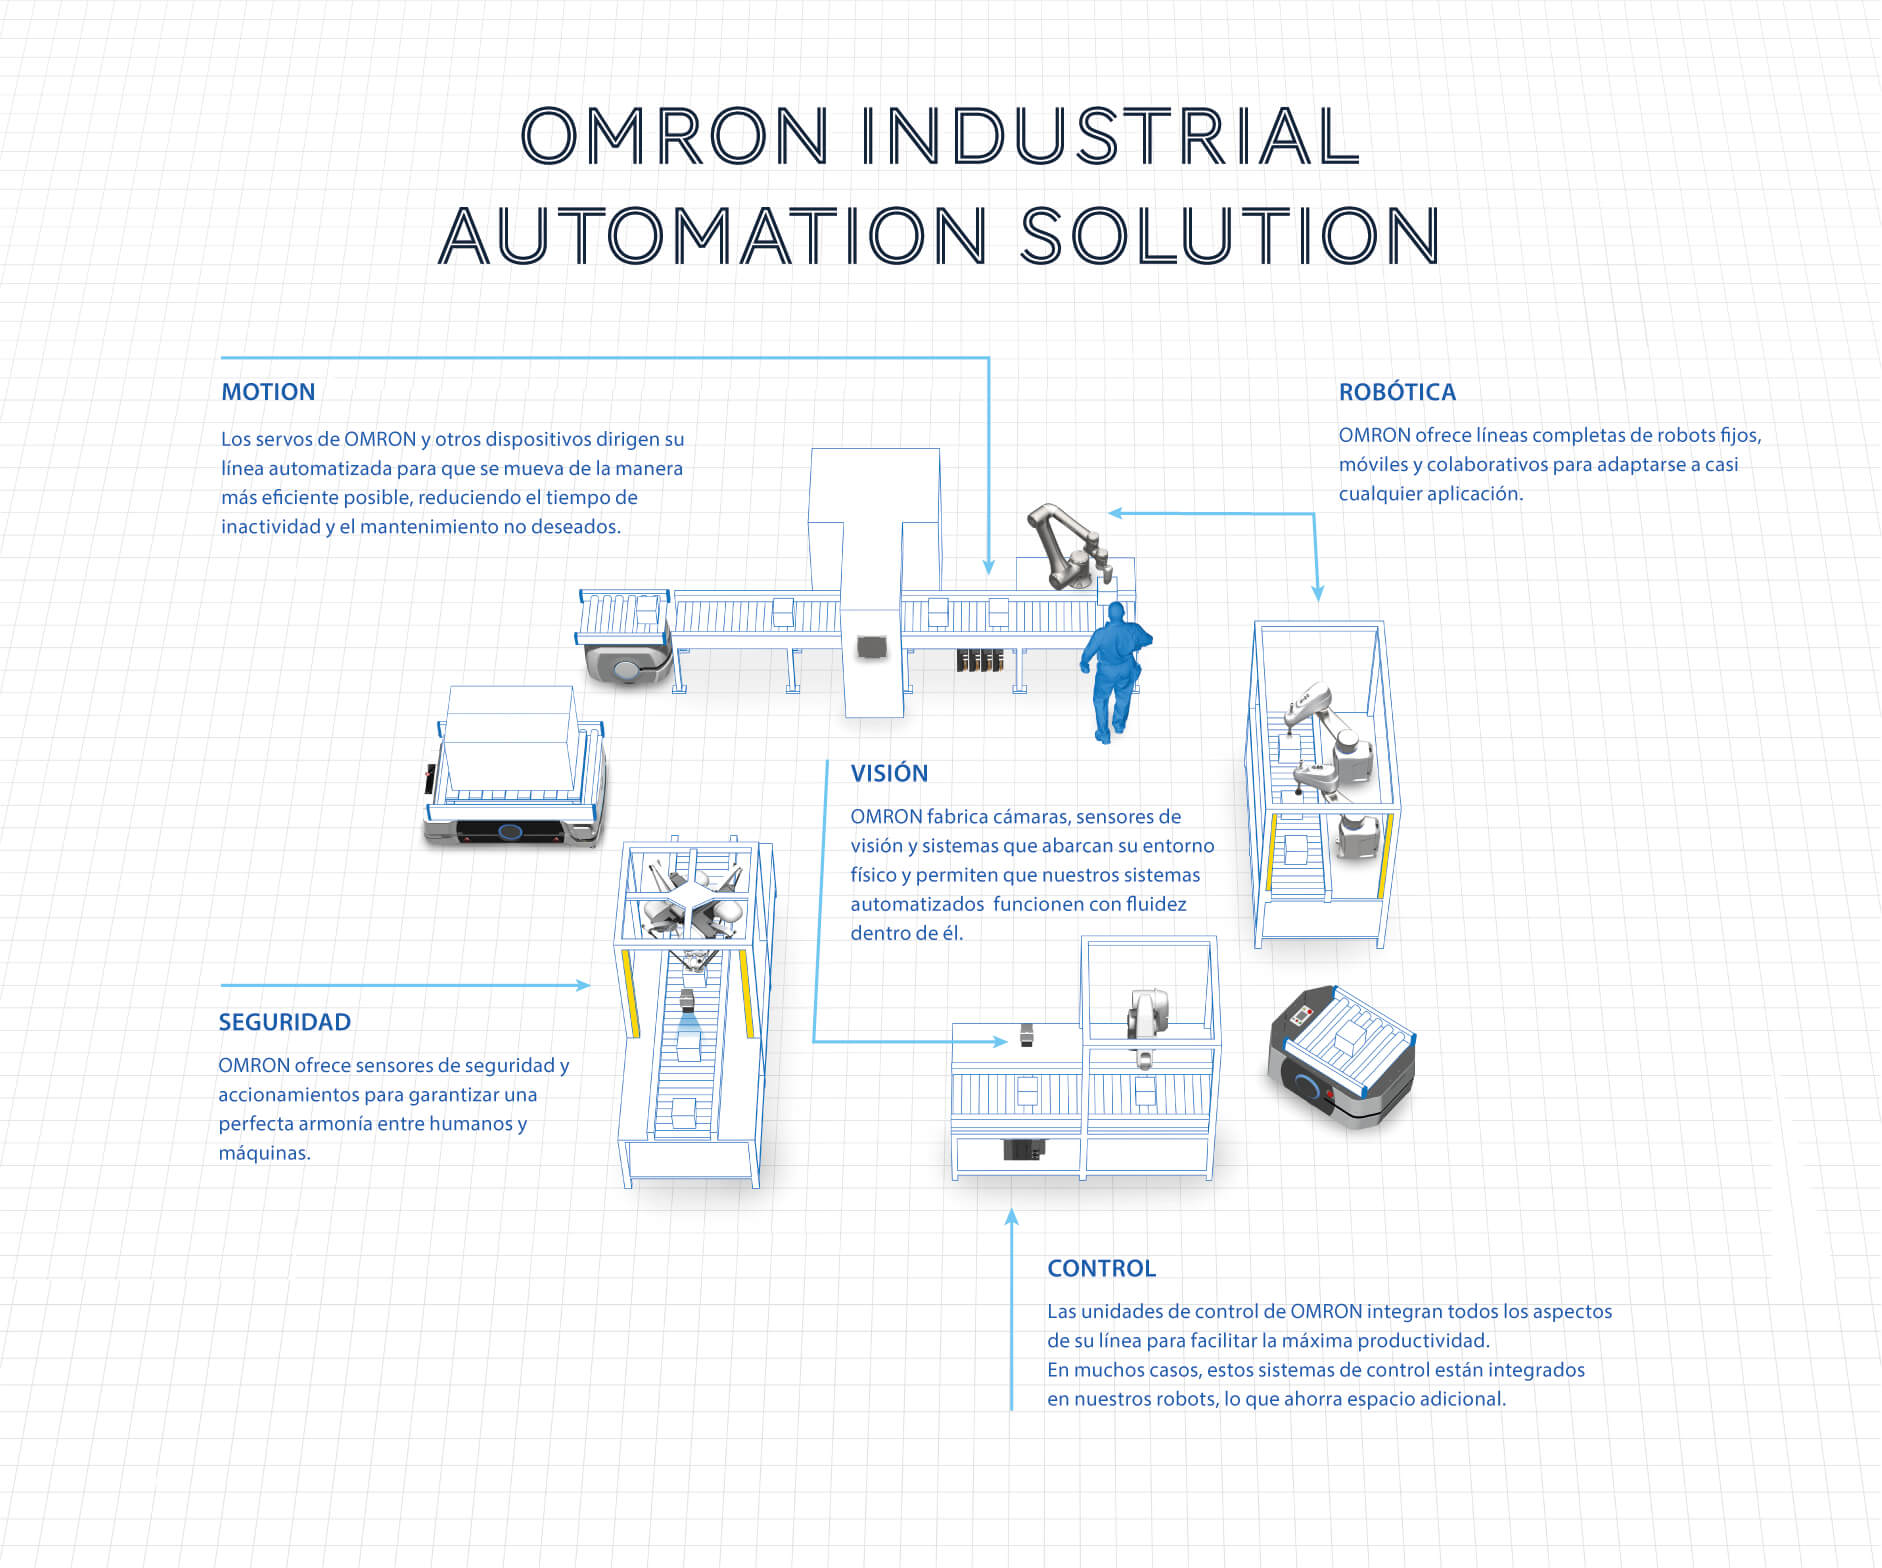 omron industrial automation solution side es sol